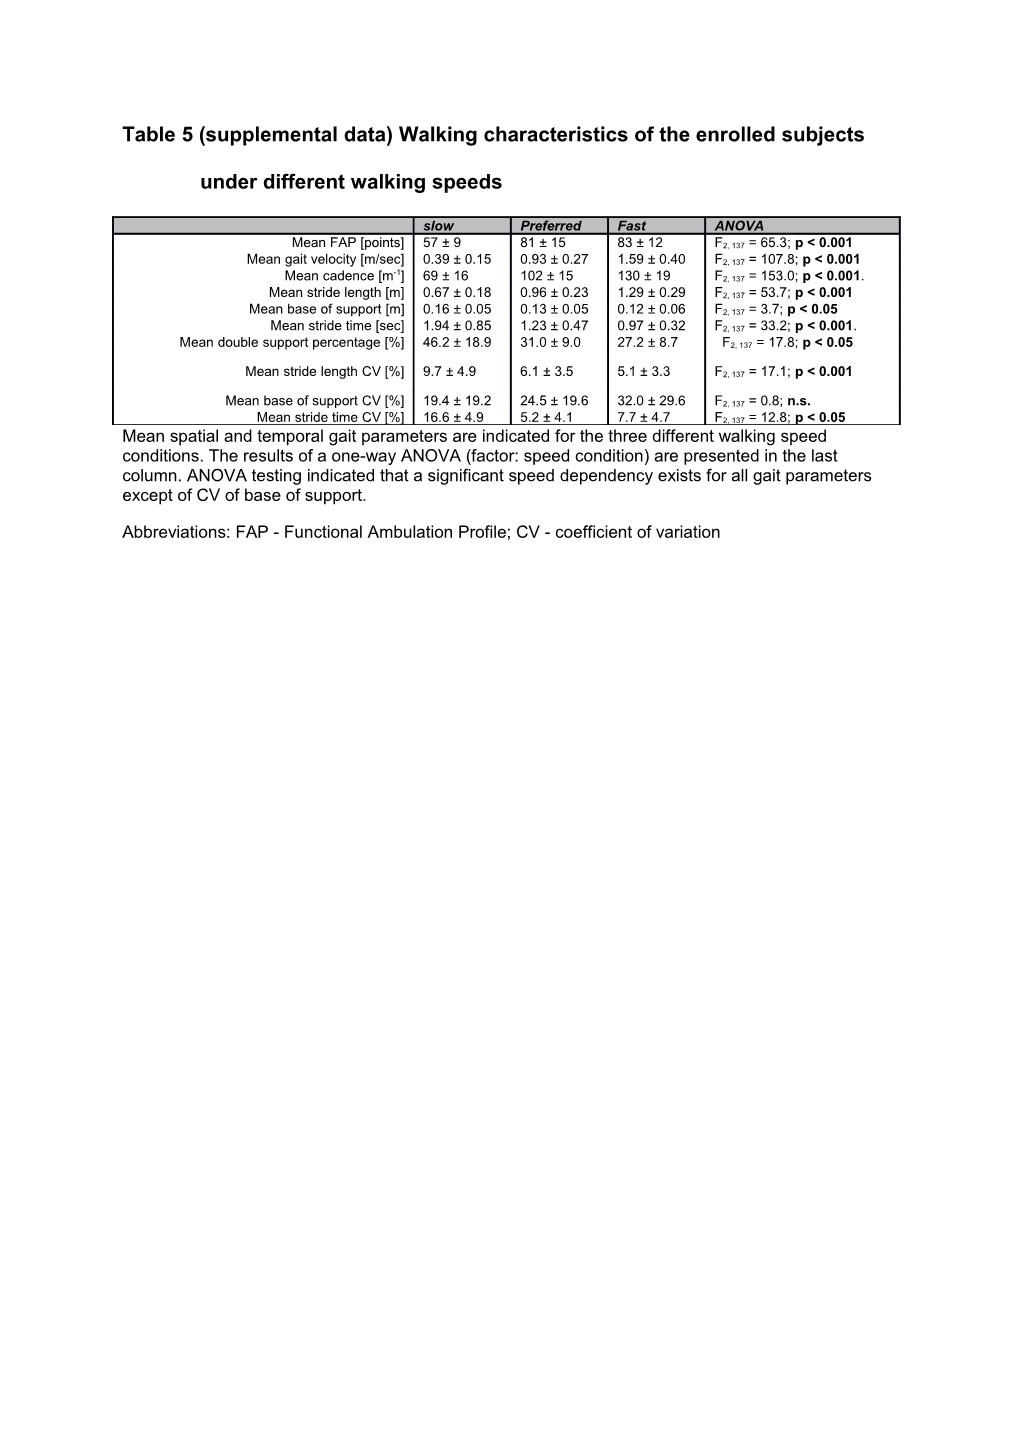 Table 5 (Supplemental Data)Walking Characteristics of the Enrolled Subjects